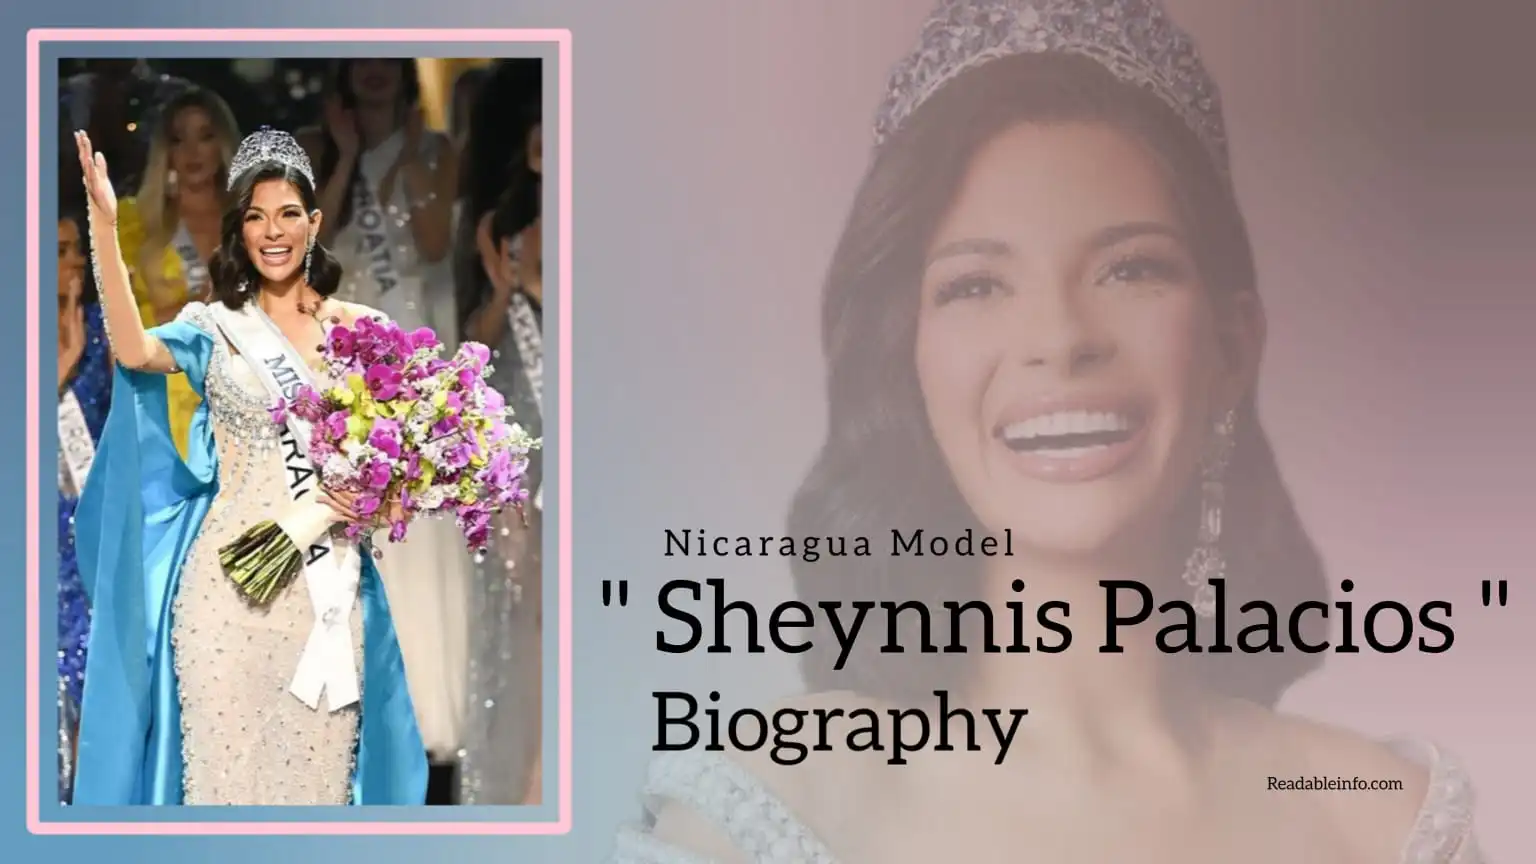 You are currently viewing Sheynnis Palacios Biography (Nicaraguan Model)